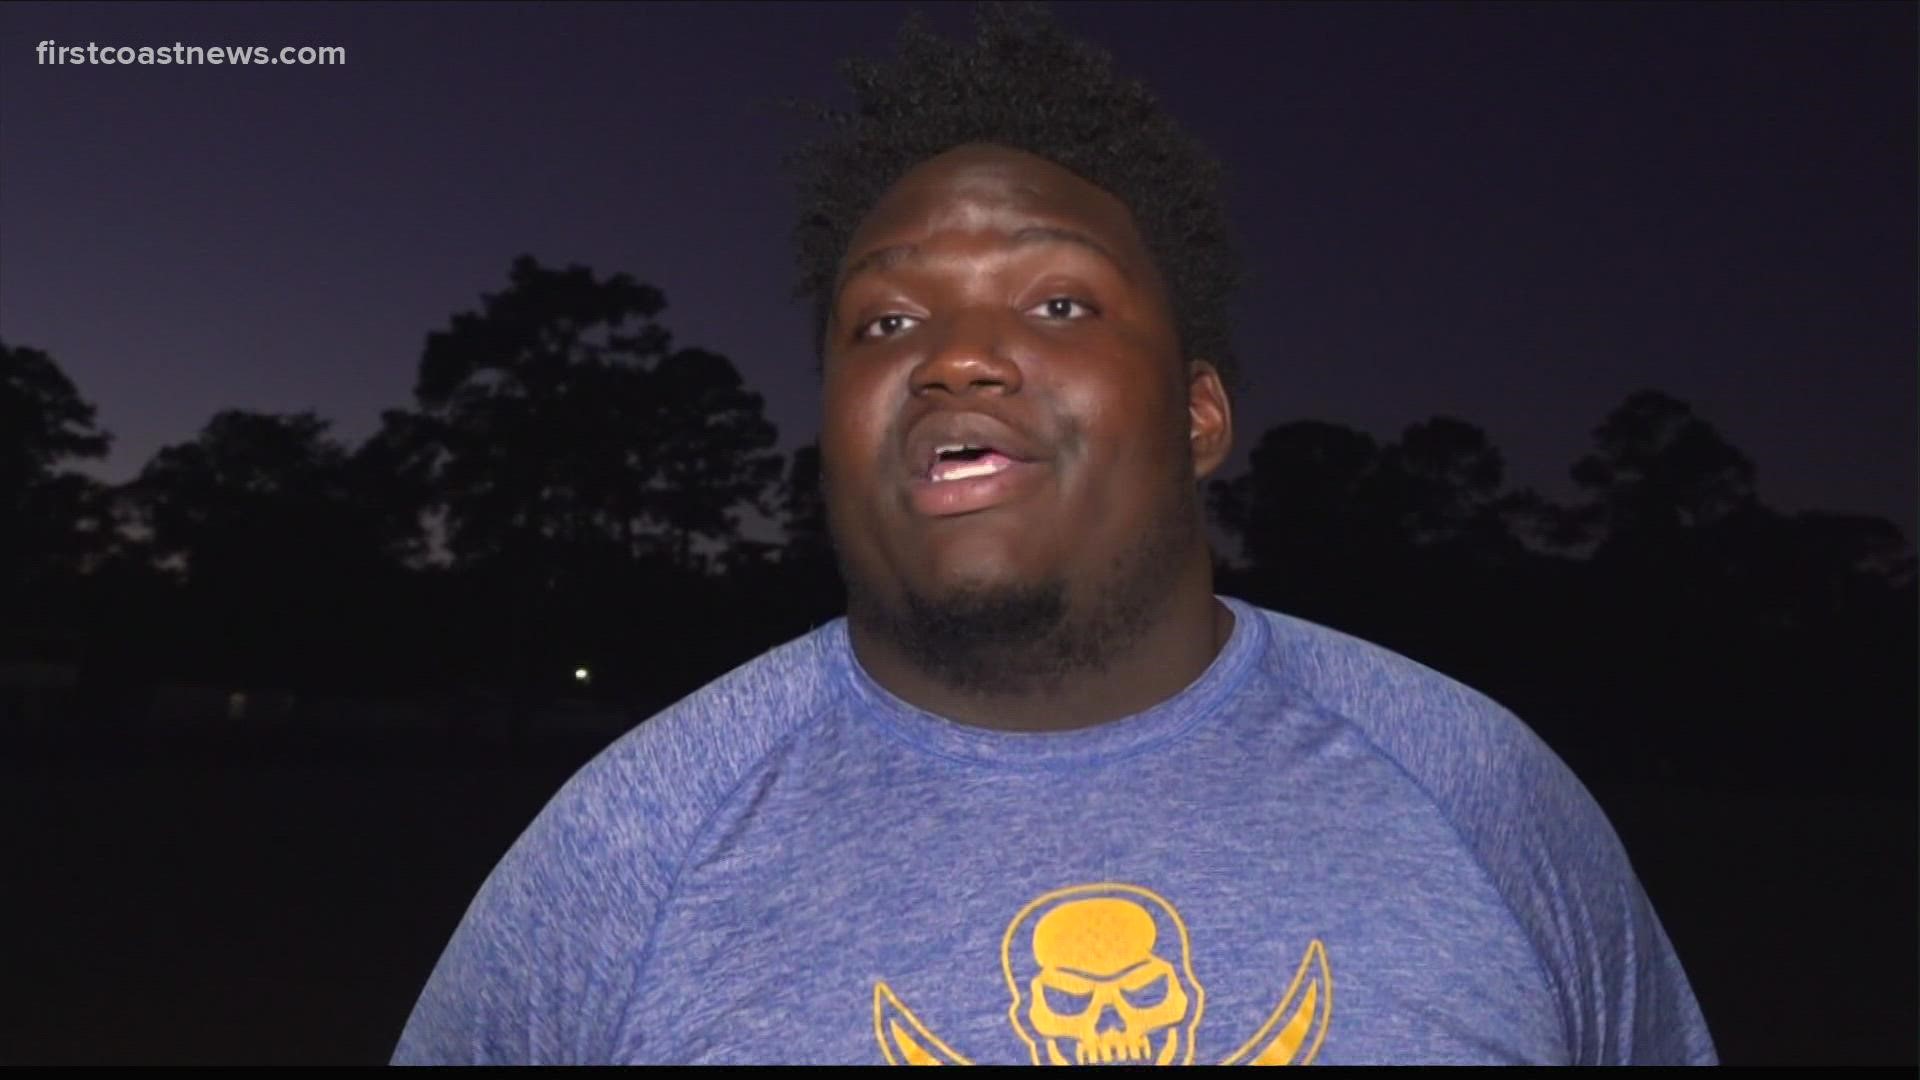 The Brunswick offensive lineman is a senior and will head to Tallahassee next year to play for the Florida State Seminoles.